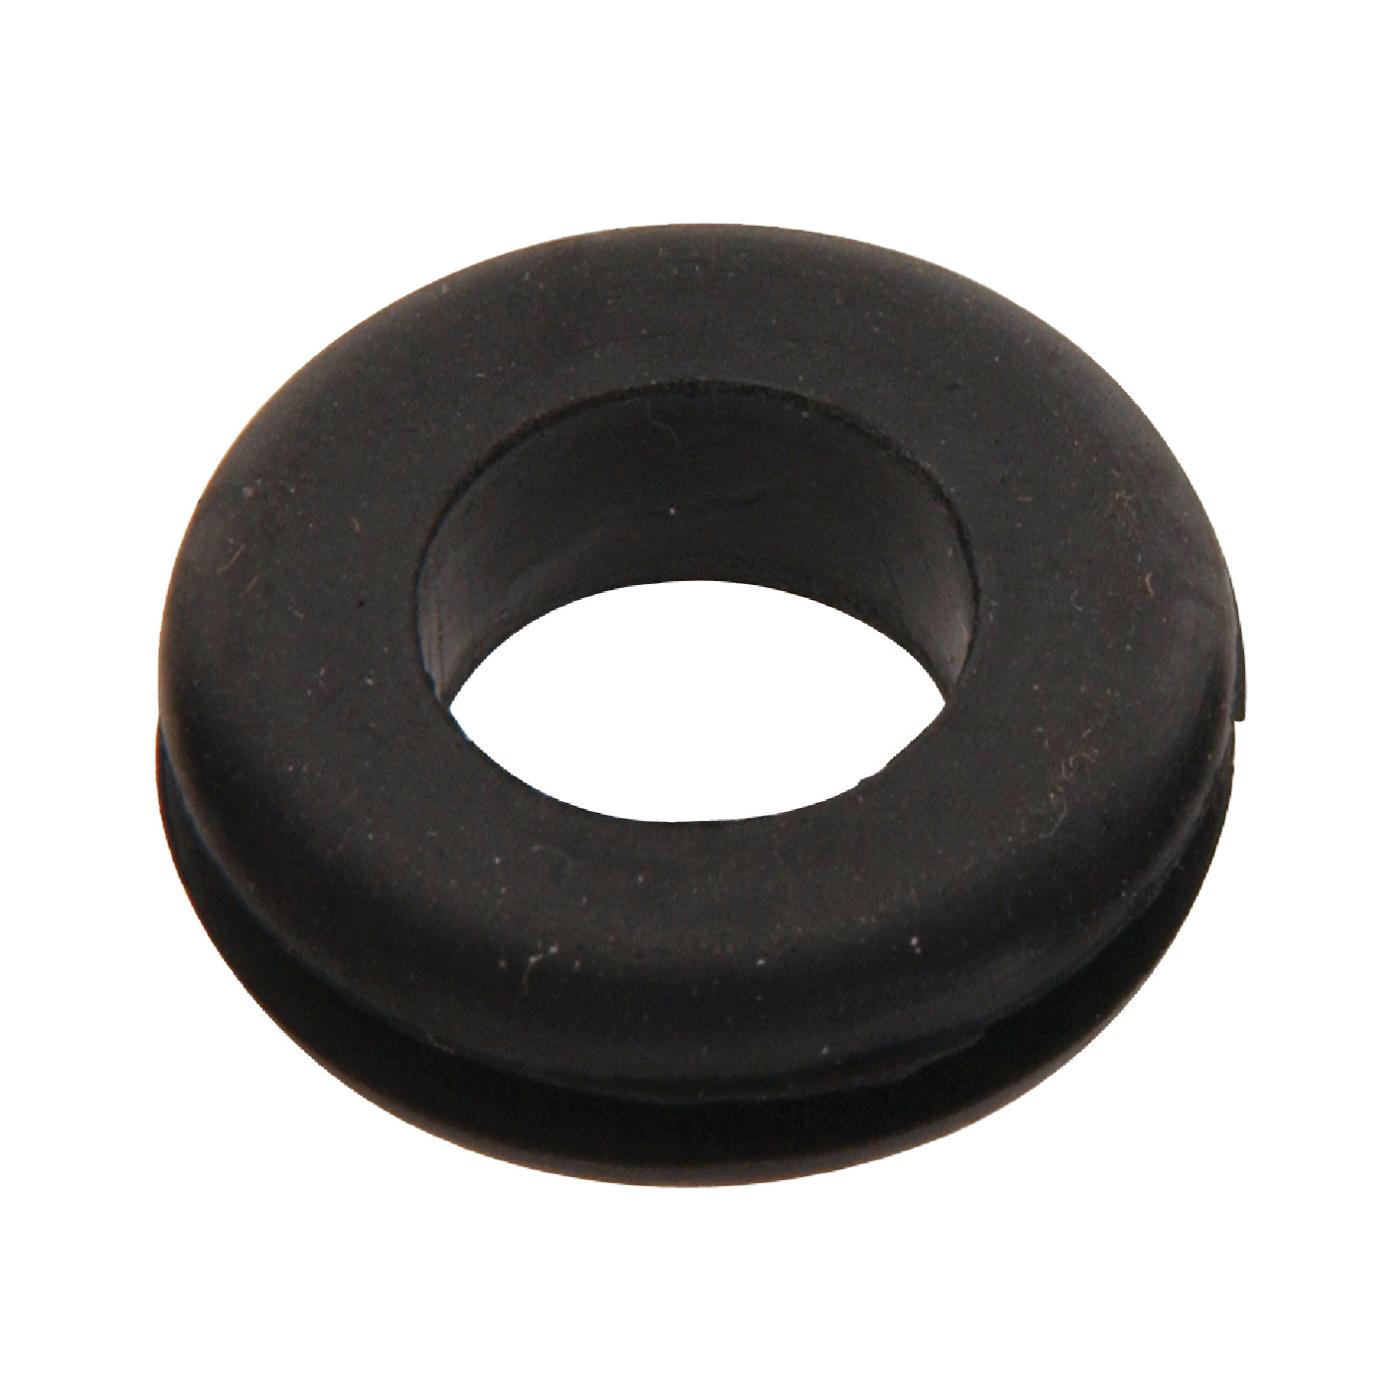 881252 Grommet, Rubber, 7/32 in Thick Panel